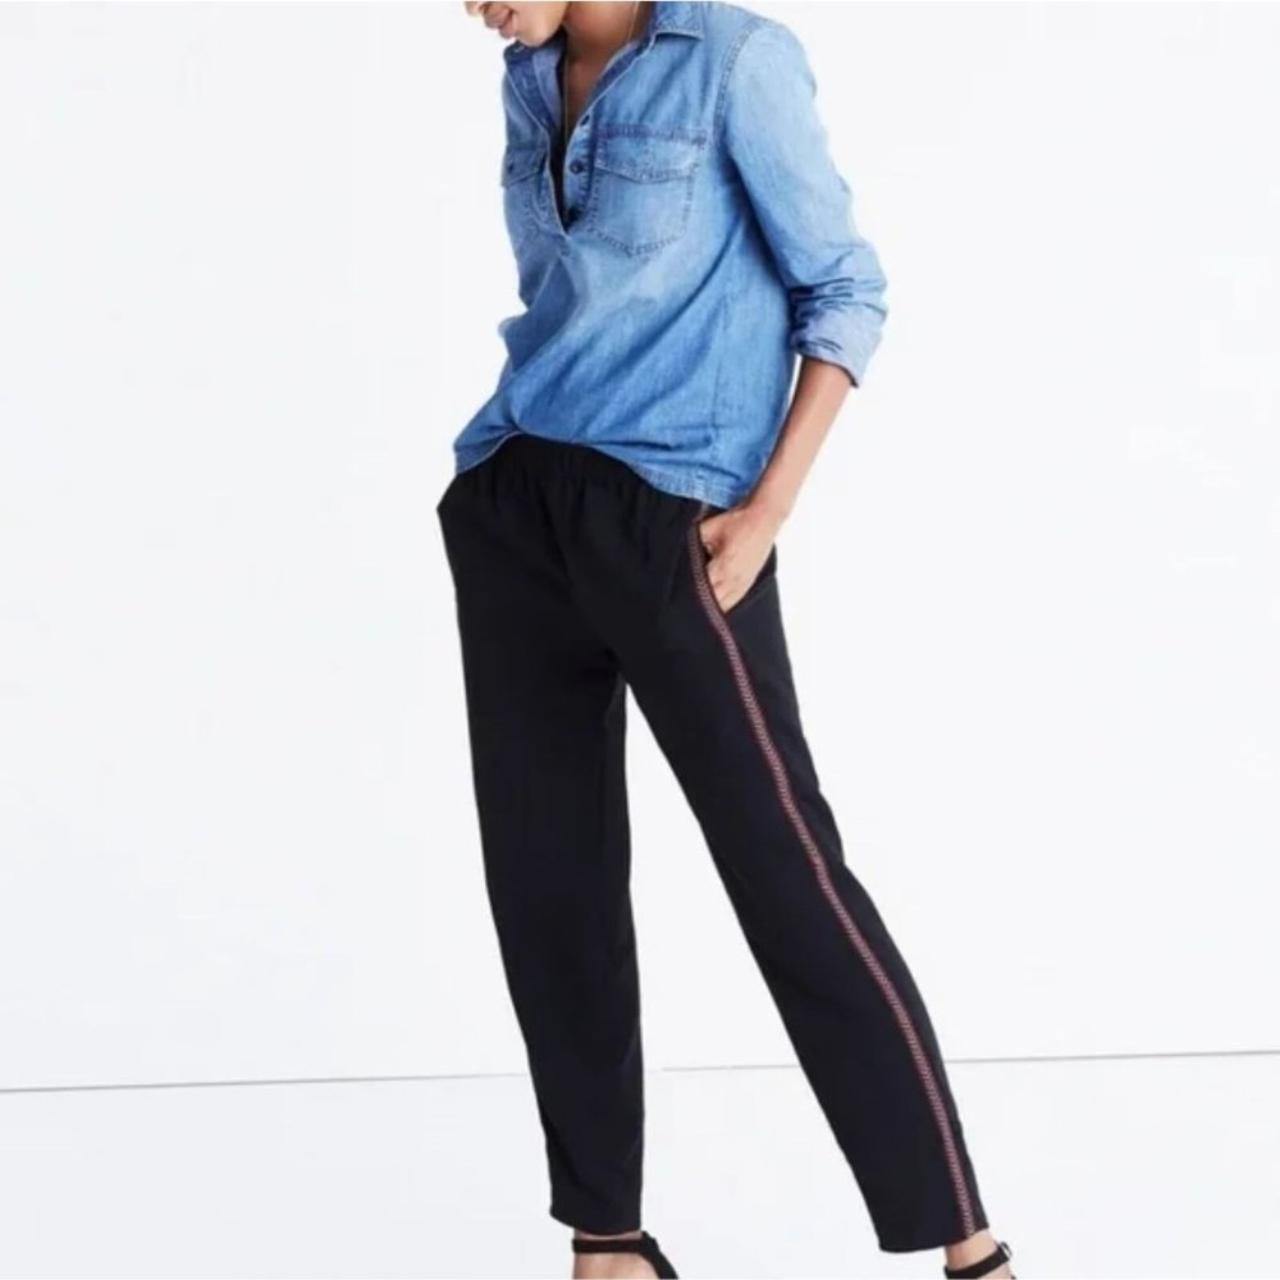 Madewell Track Trousers in Prairie Posies | Leggings Do Not Count as Pants:  Why I Can't Get Behind the Trend | POPSUGAR Fashion UK Photo 11